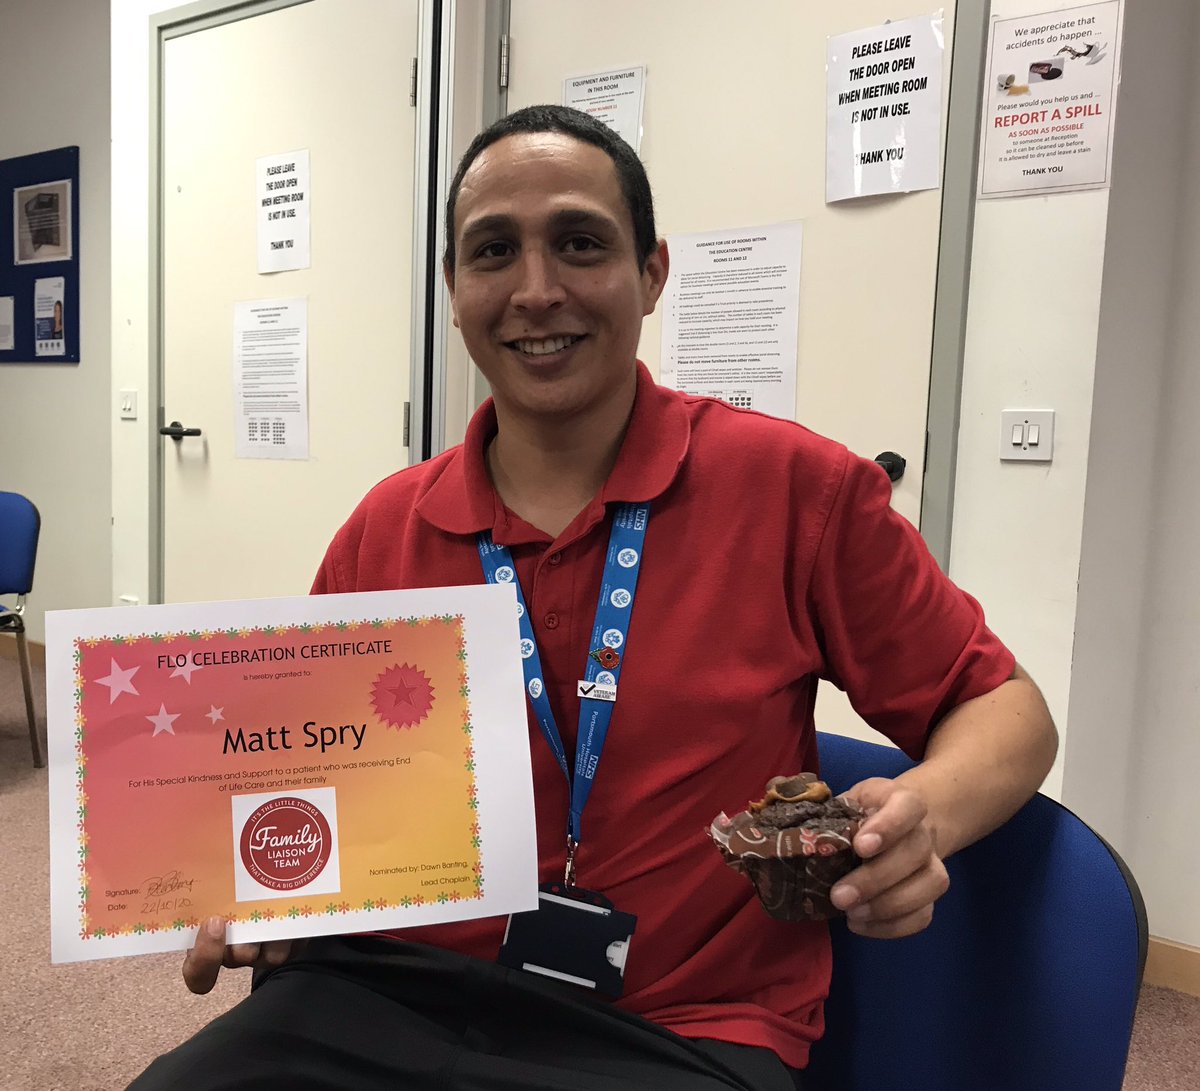 A Celebration Certificate for Matt today in recognition of his special kindness and support to a patient receiving end of life care and their family 🌈💙#careandcompassion #awesome @QAHospitalNews @hcdocherty1 @Suemetcalfe12 @Alison5Cole @charwinsor11